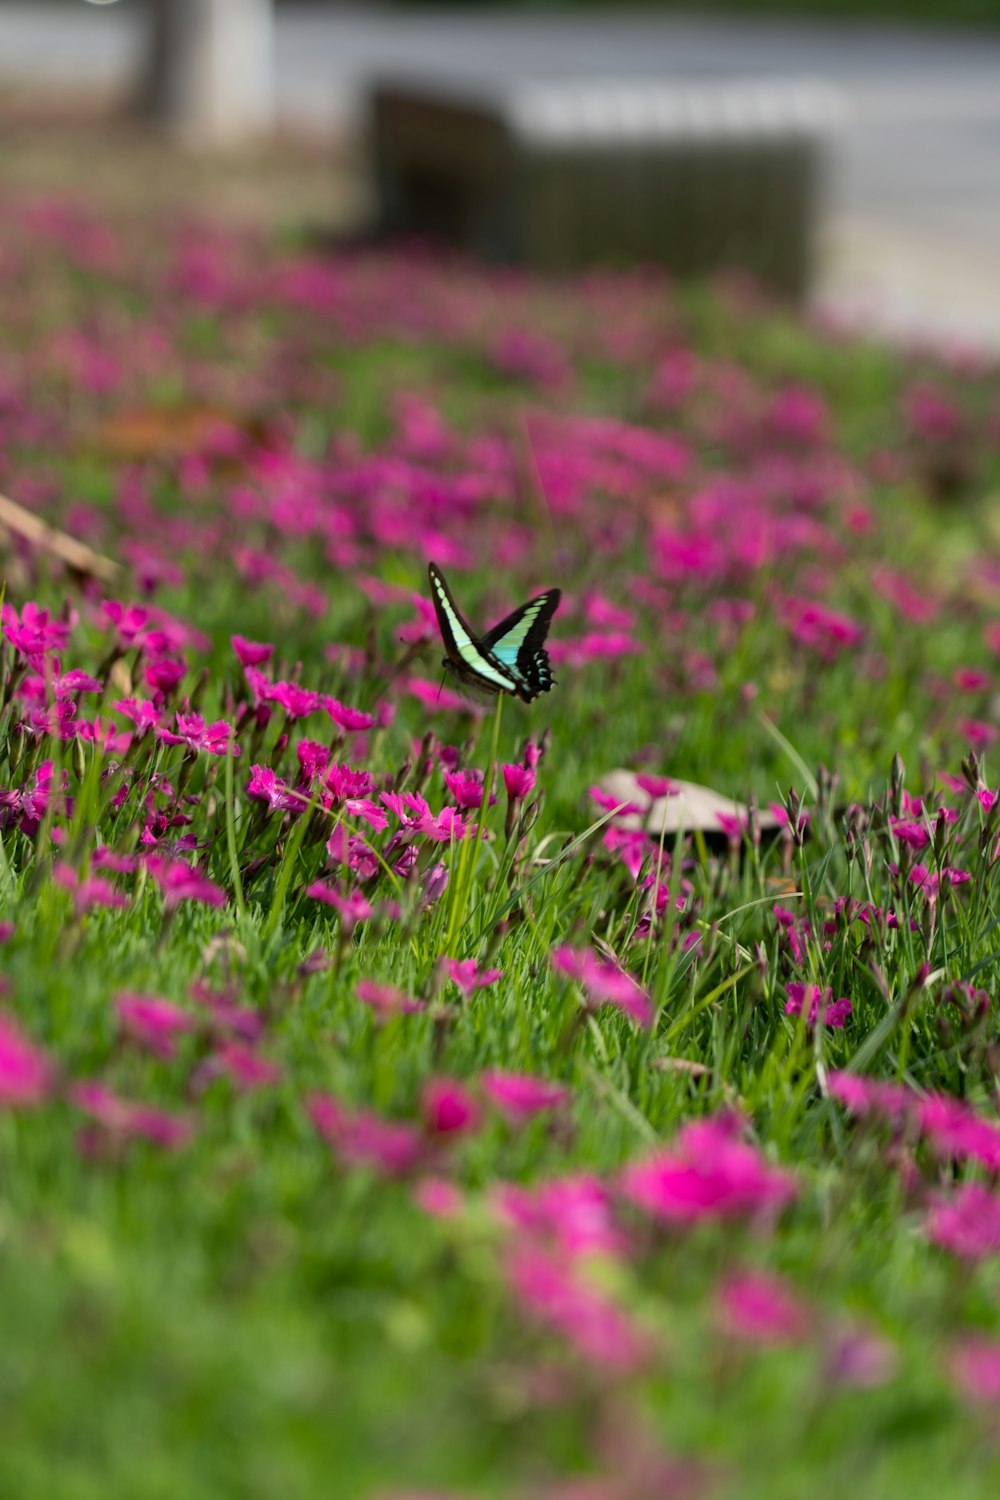 a green and blue butterfly flying over a field of pink flowers